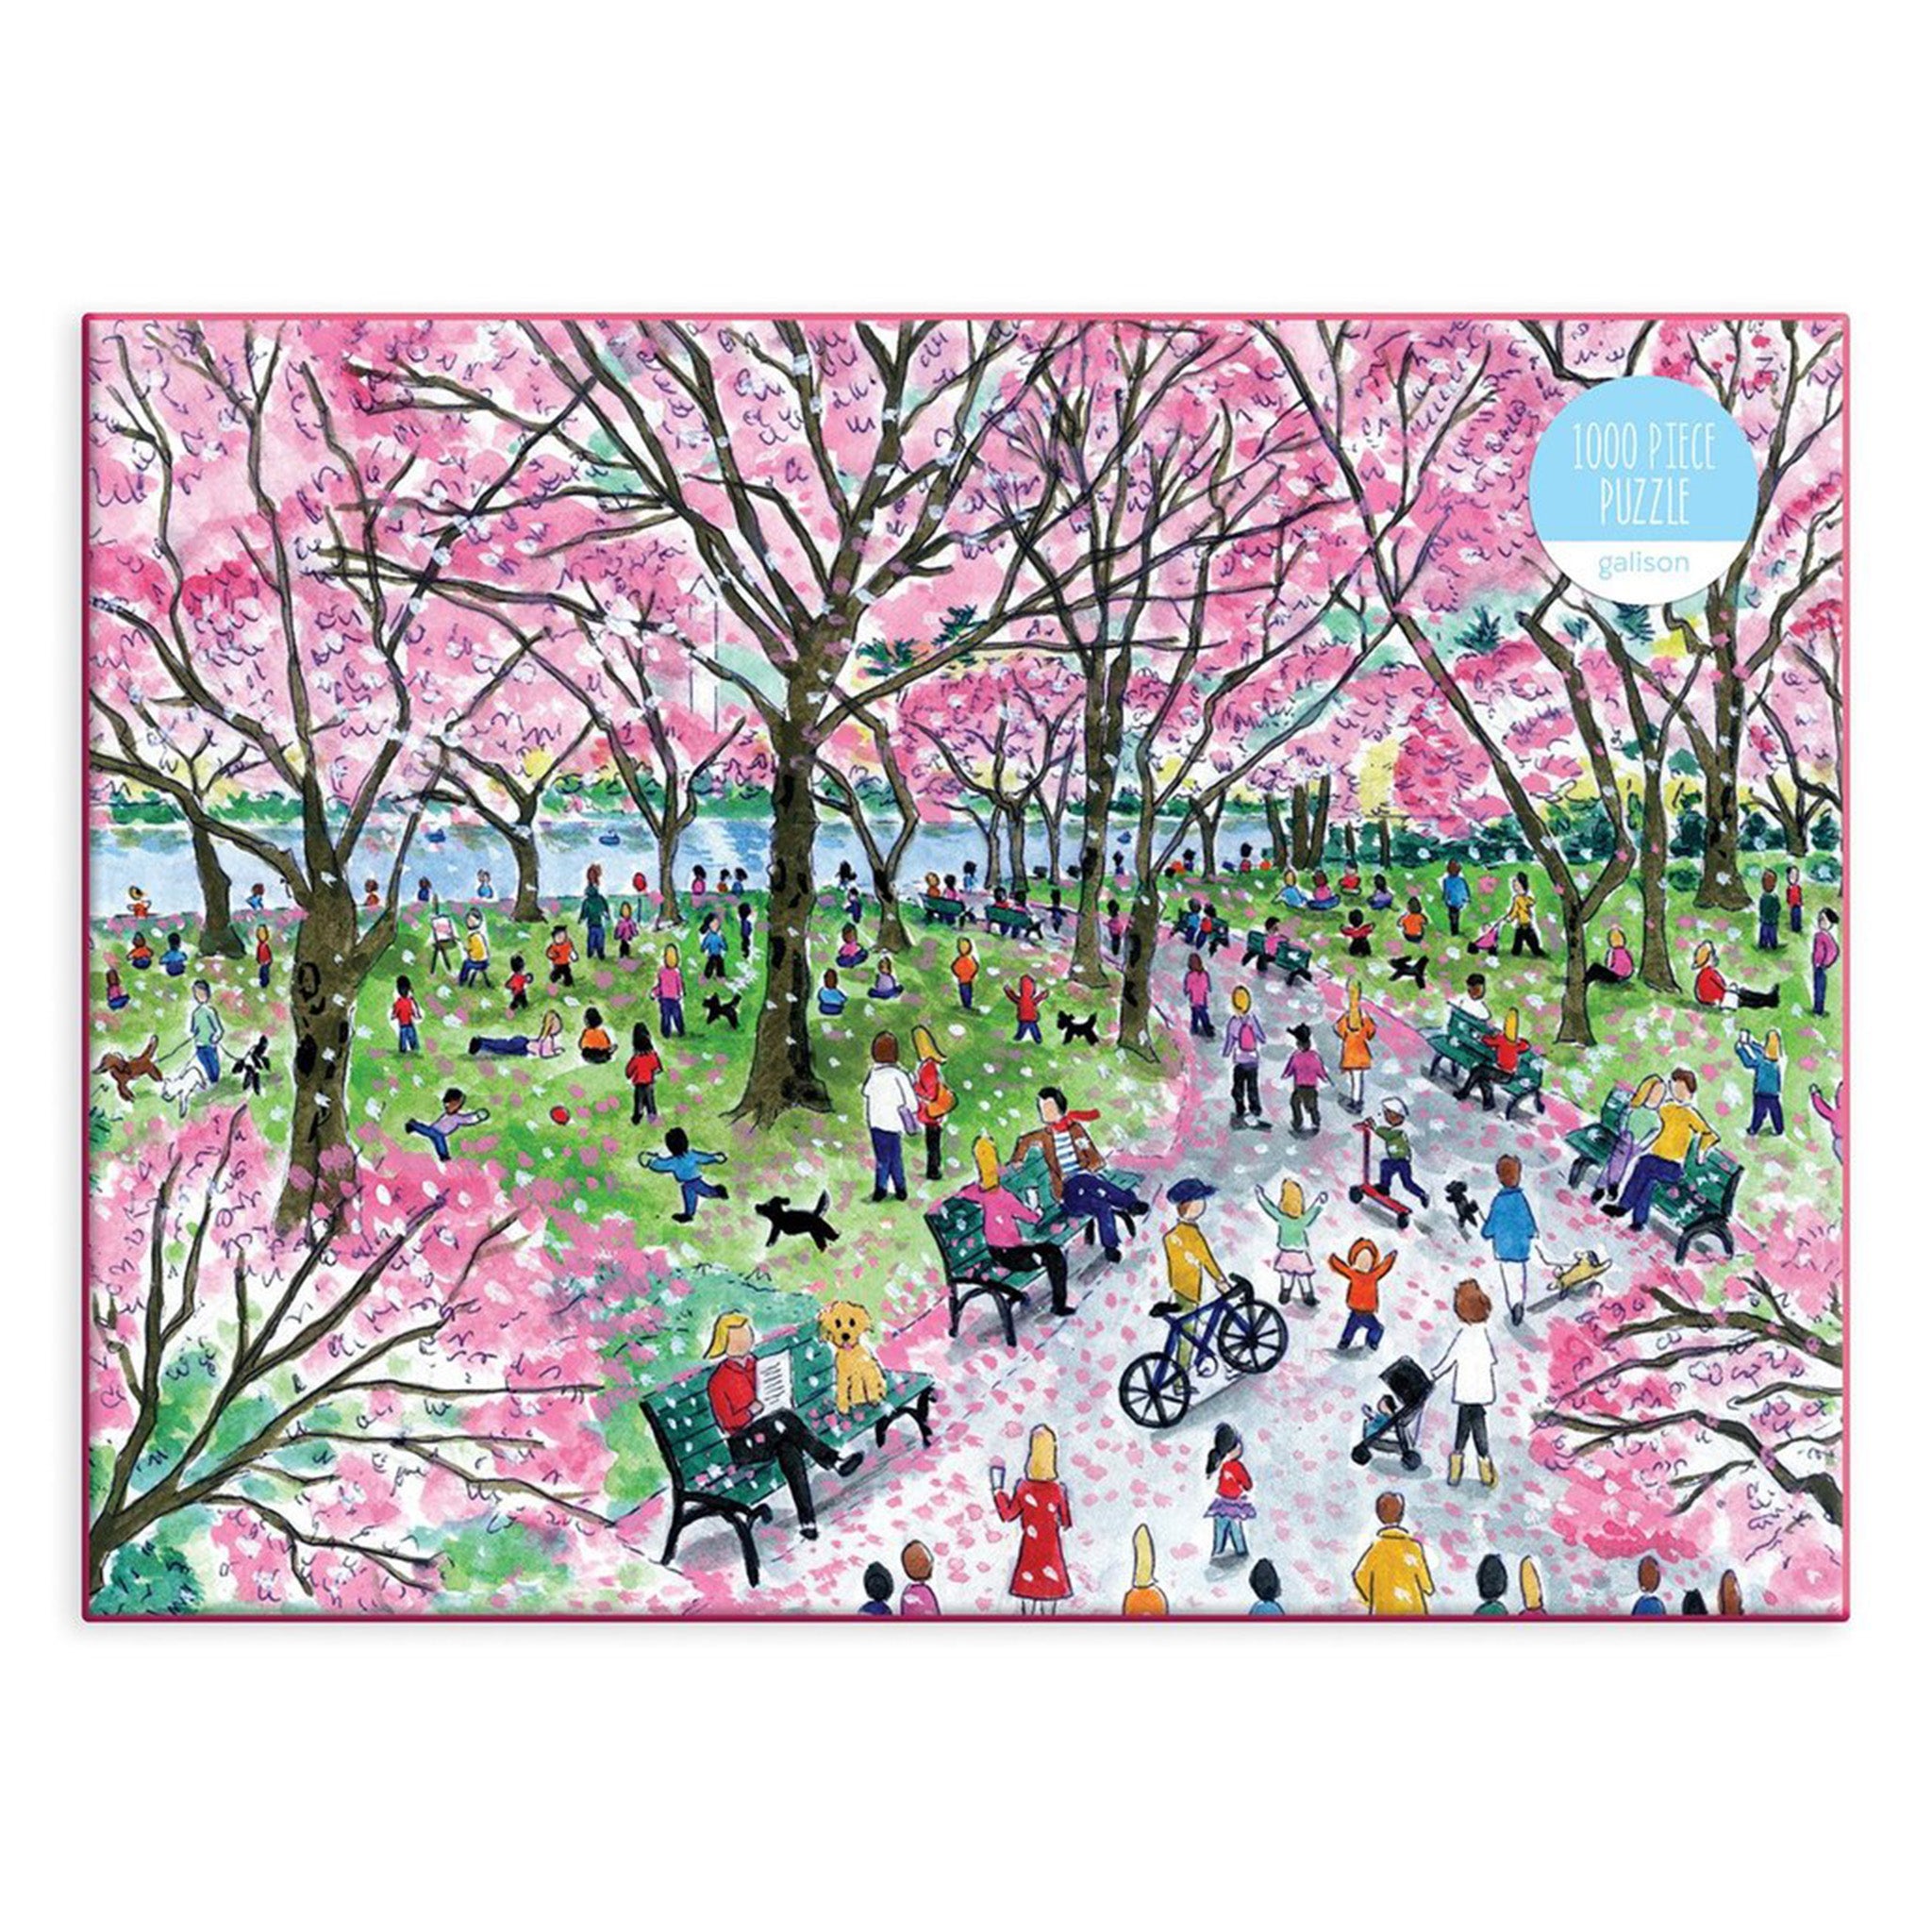 Puzzle Songs under the Cherry Tree Grafika-F-32463 1000 pieces Jigsaw  Puzzles - Erotics and Sensuality - Jigsaw Puzzle